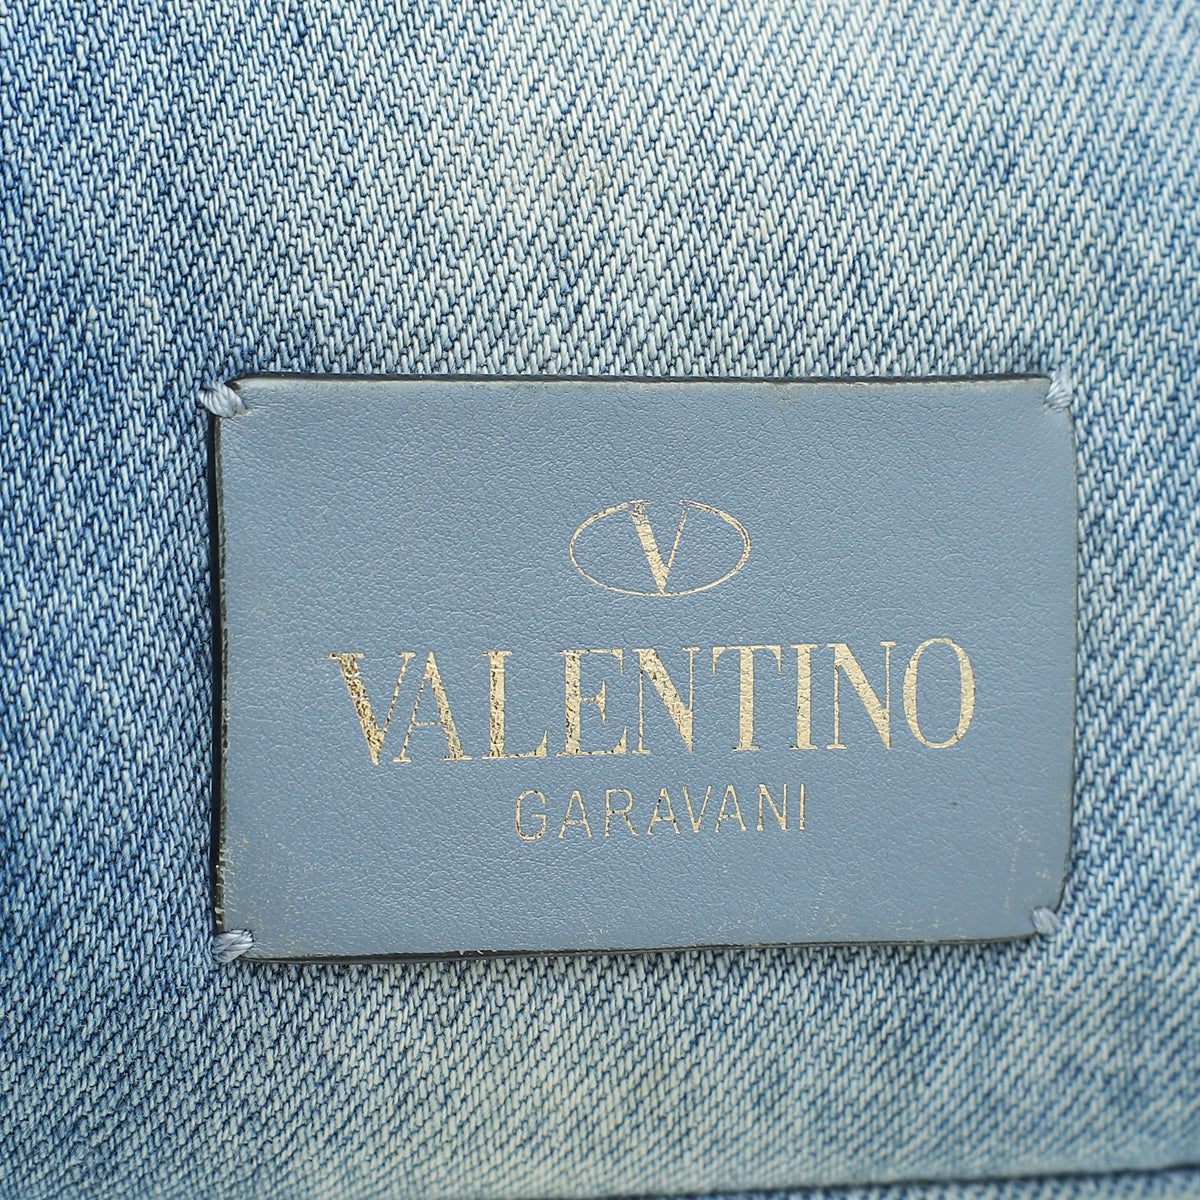 Valentino Blue Denim Butterfly Embroidered My Rockstud Frame Small Bag